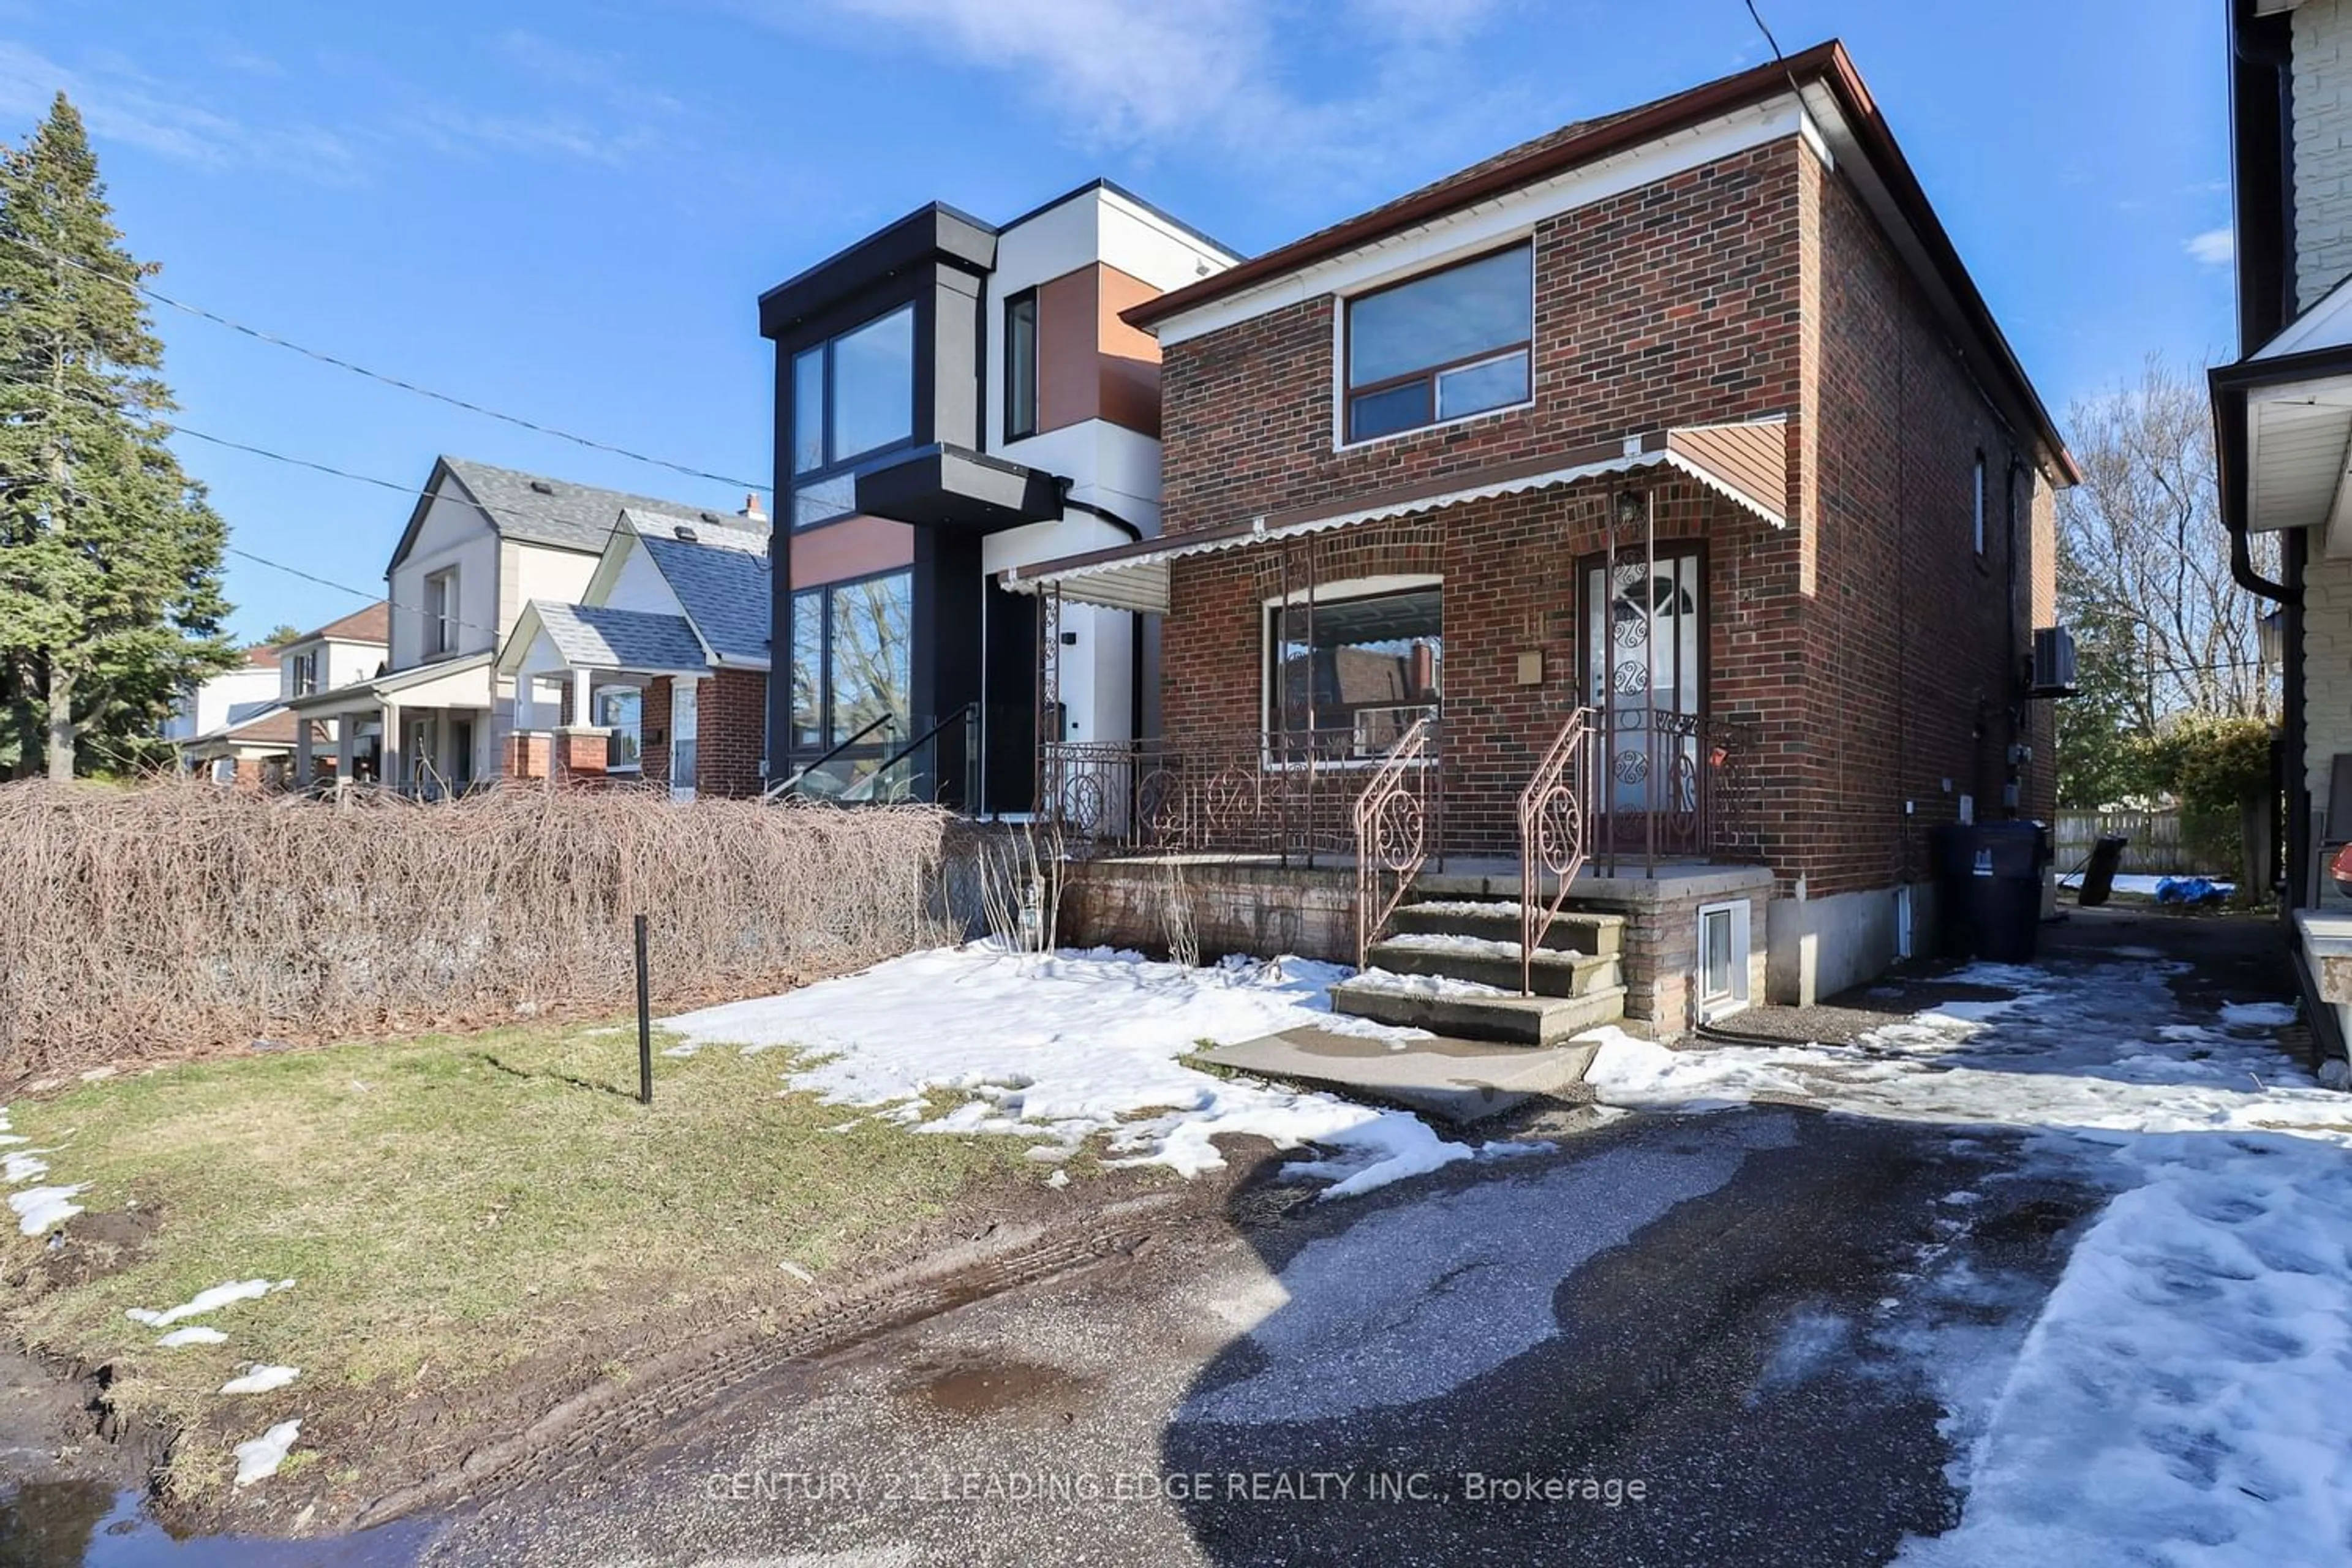 Home with unknown exterior material for 11 Savoy Ave, Toronto Ontario M4C 2X4